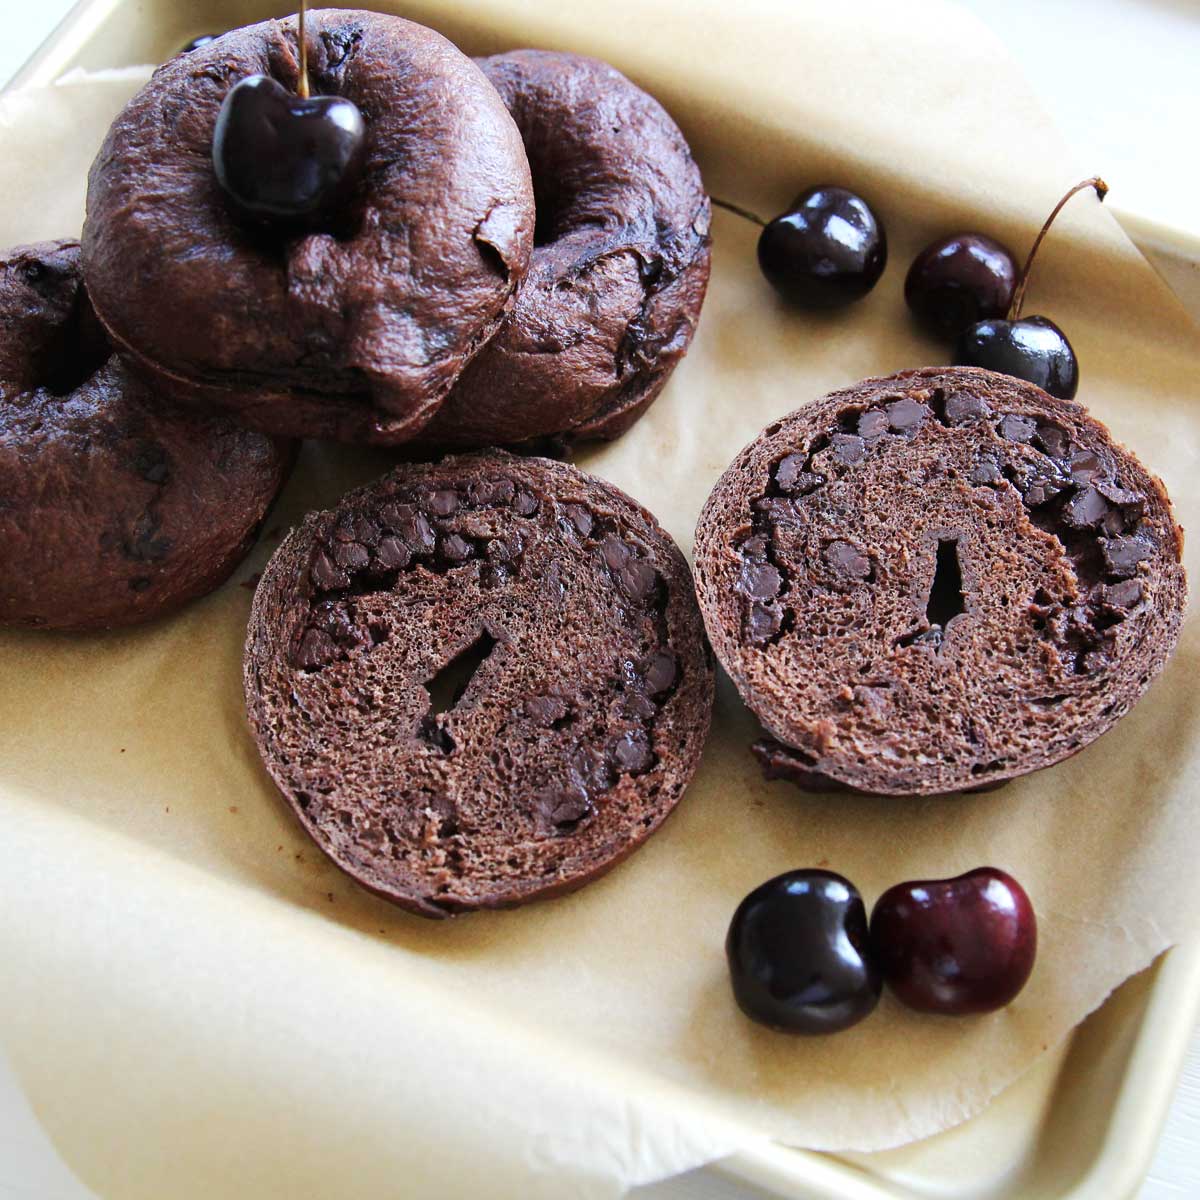 Black Forest Chocolate Chip & Cherry Stuffed Bagels - Guacamole Bagels